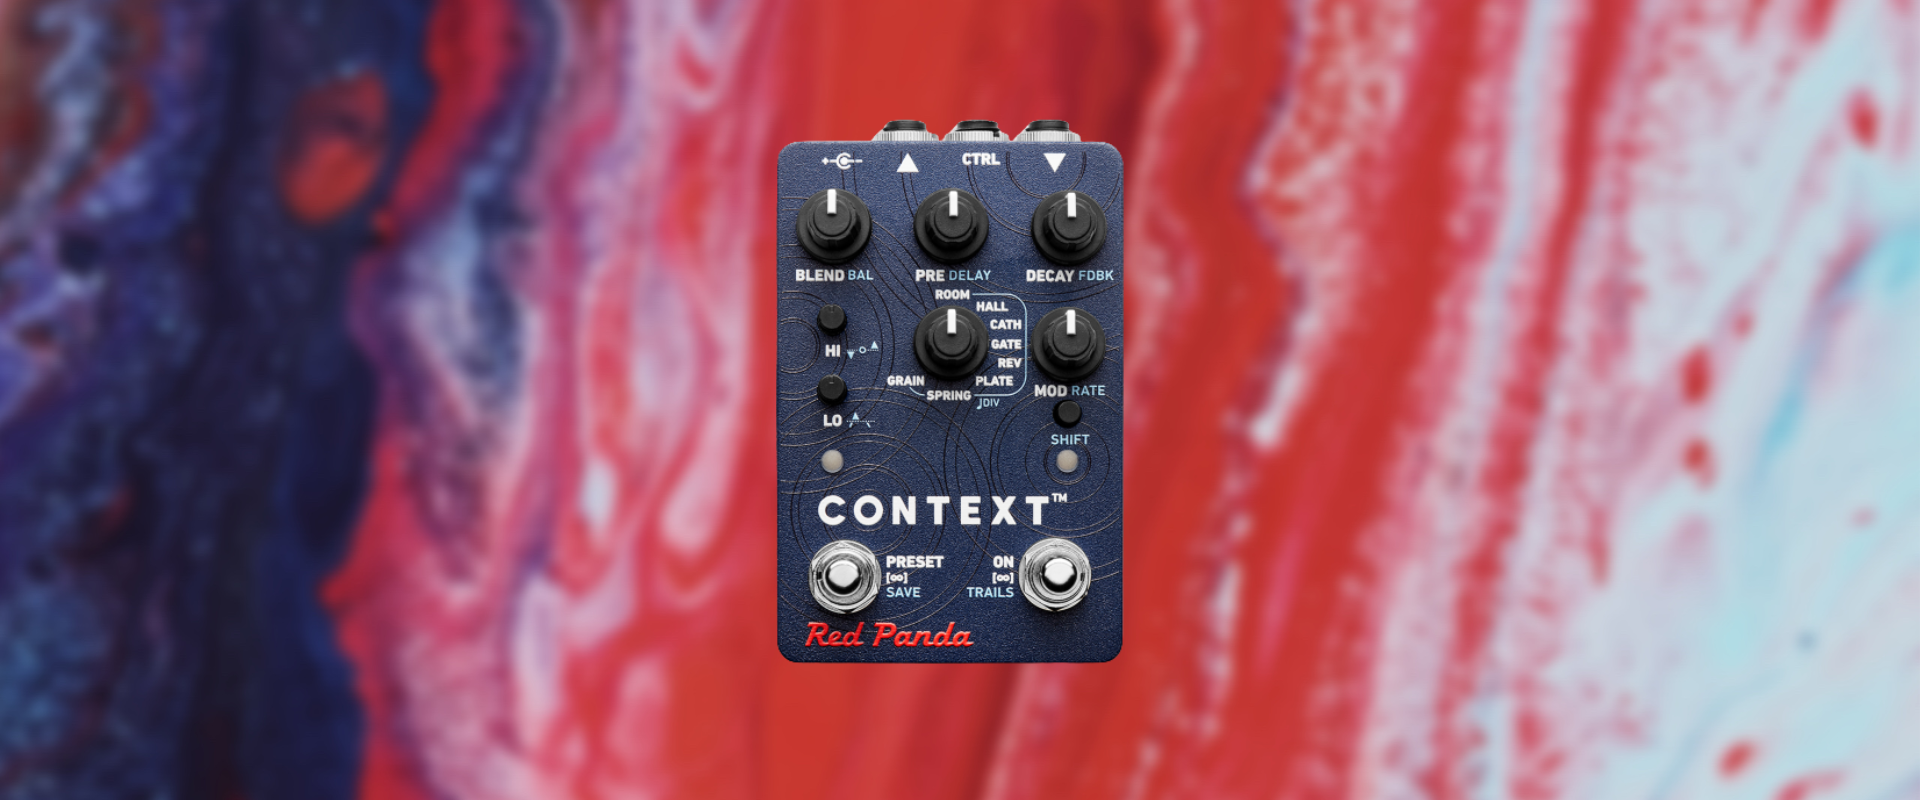 Red Panda Contect 2 Reverb Review - An all-around reverb pedal for